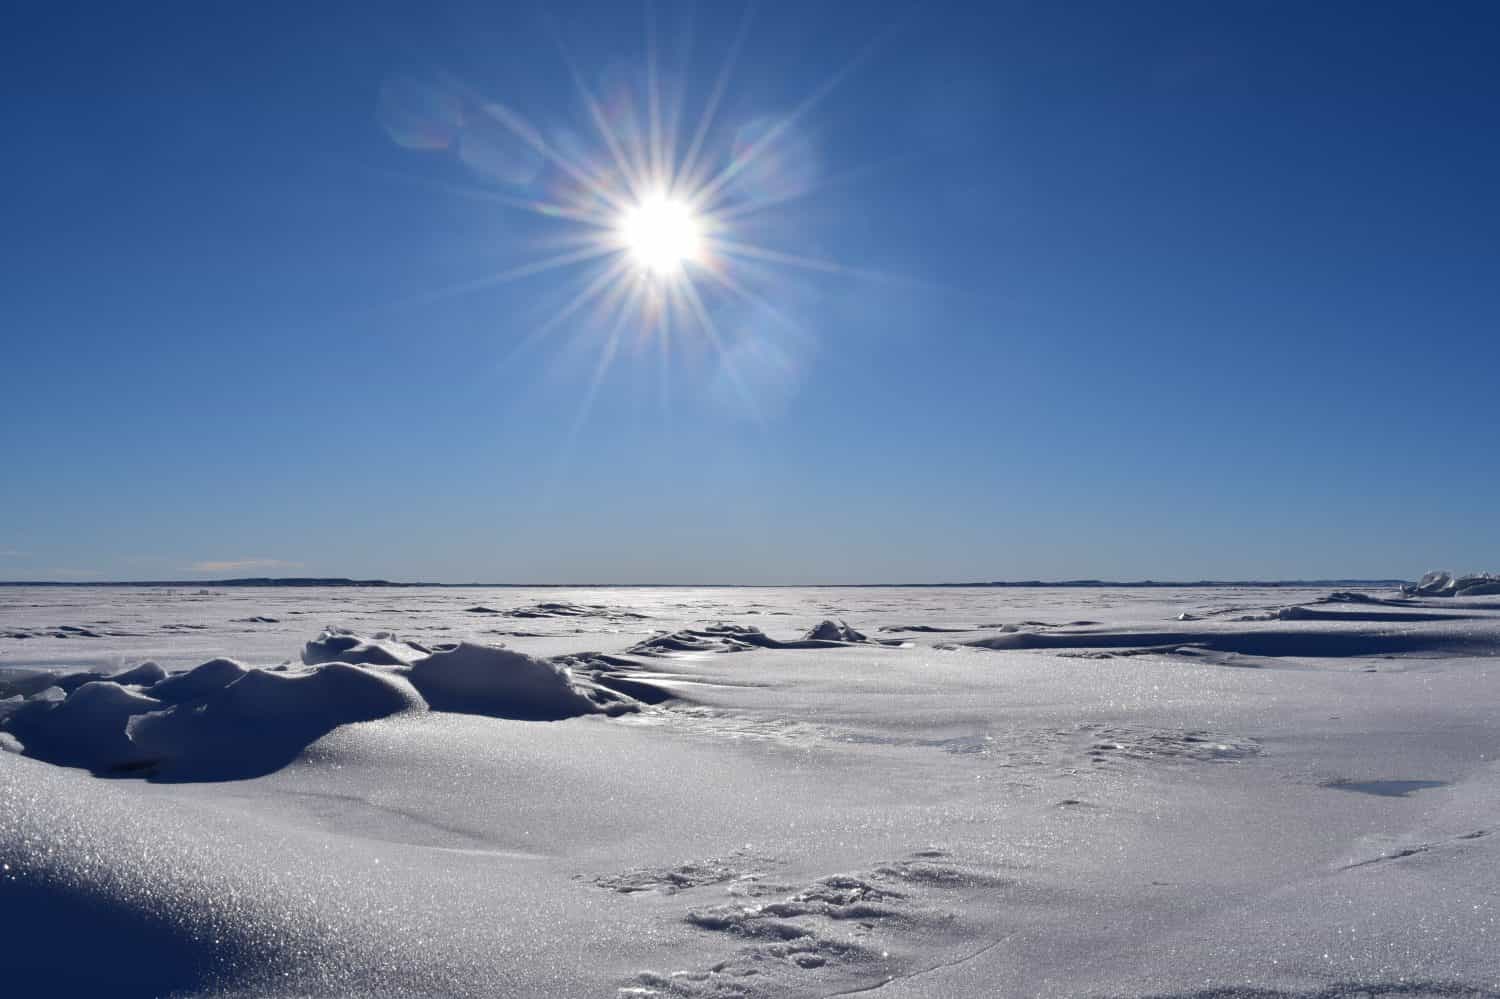 view over frozen lake on a sunny winter day with blue sky and snow on ice glittering in sunlight at Fort Peck Lake in Montana